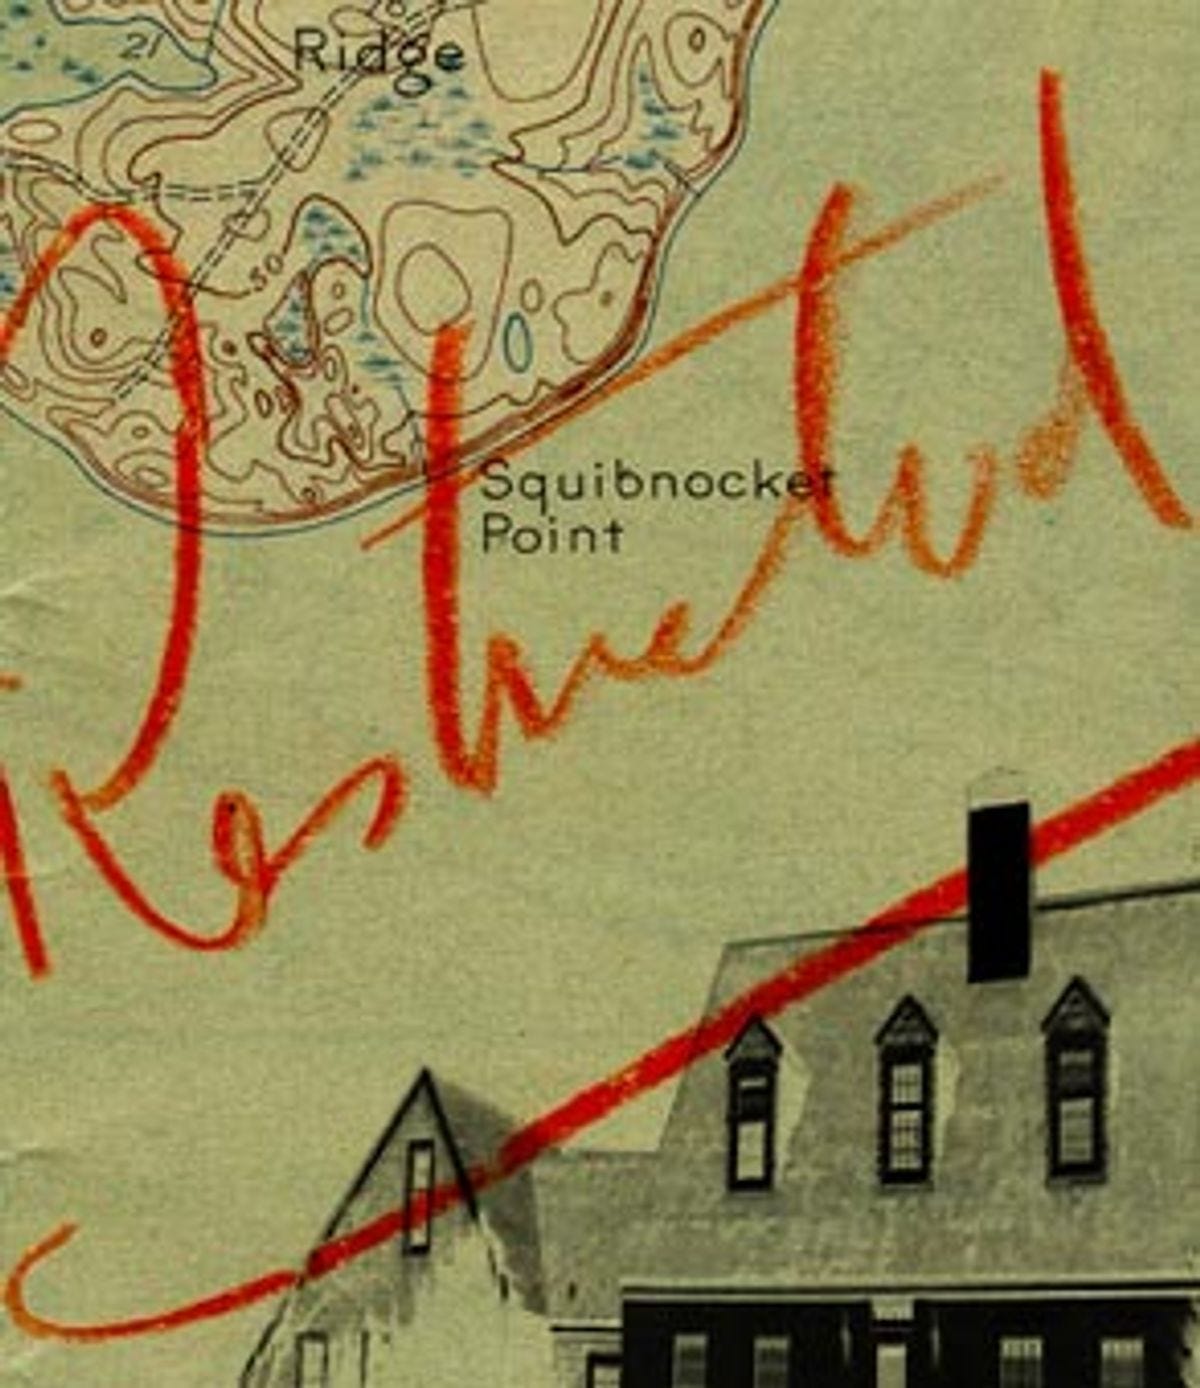 Map of Squibnocket Point on Martha's Vineyard with the word "Restricted" handwritten in red on it. Ad the bottom of the map there is superimposed a drawing of part of a large house. 